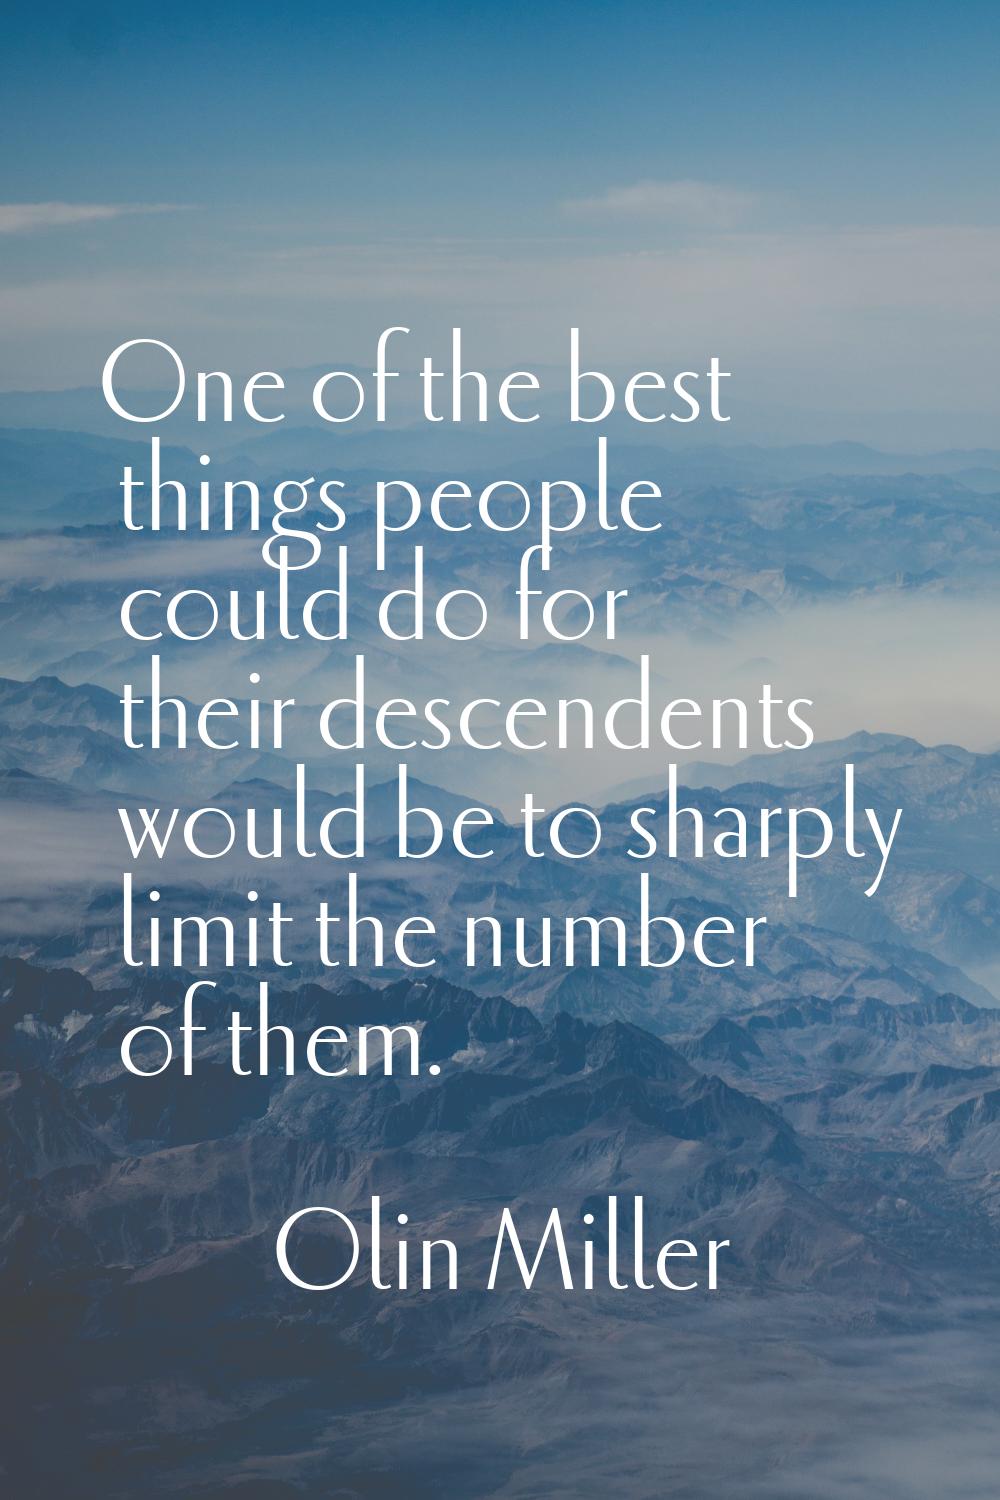 One of the best things people could do for their descendents would be to sharply limit the number o